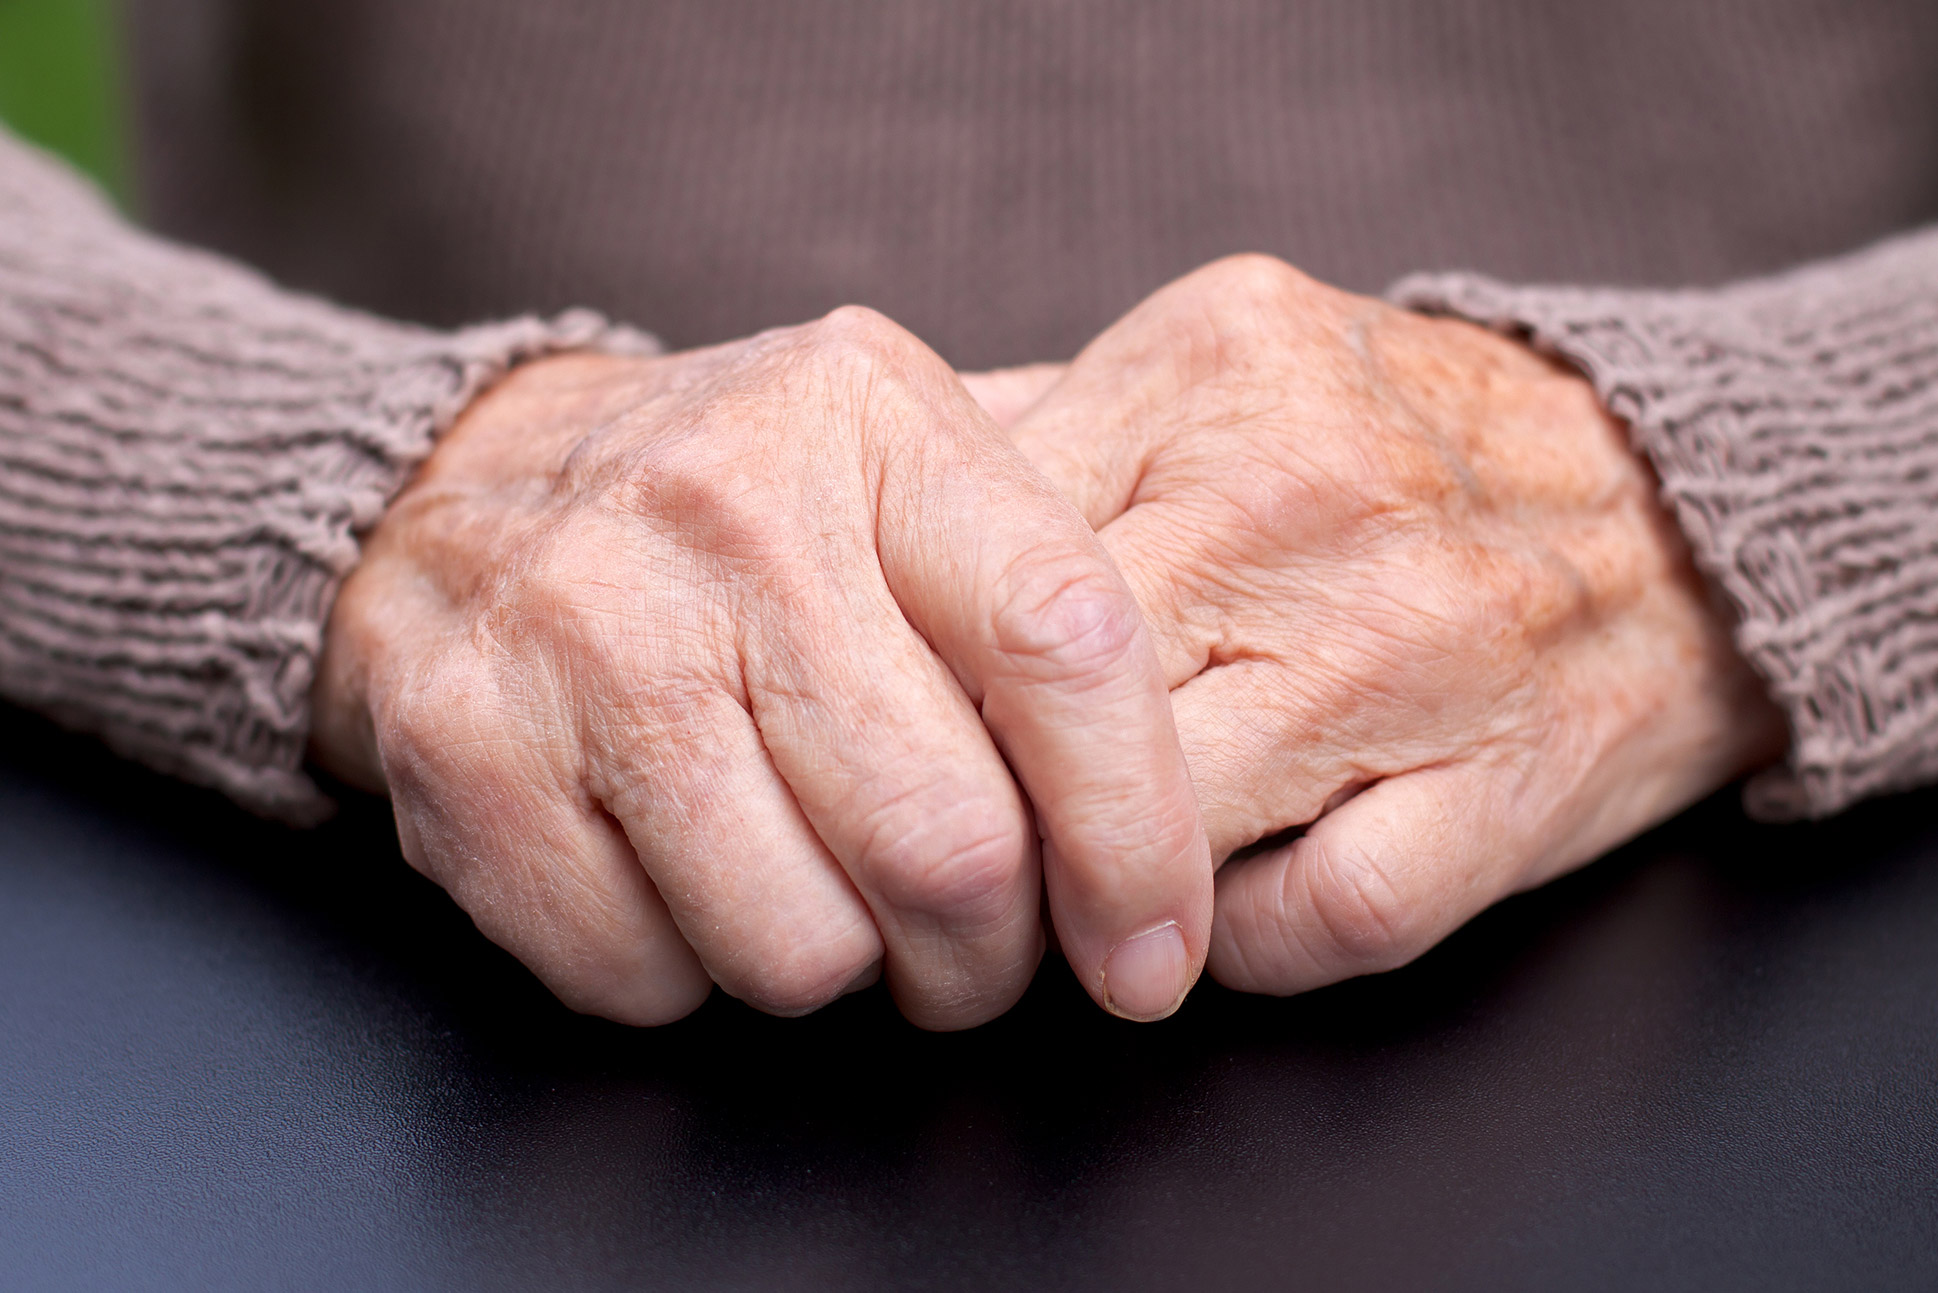 An Old Arthritis Drug Offers New Hope for Dementia